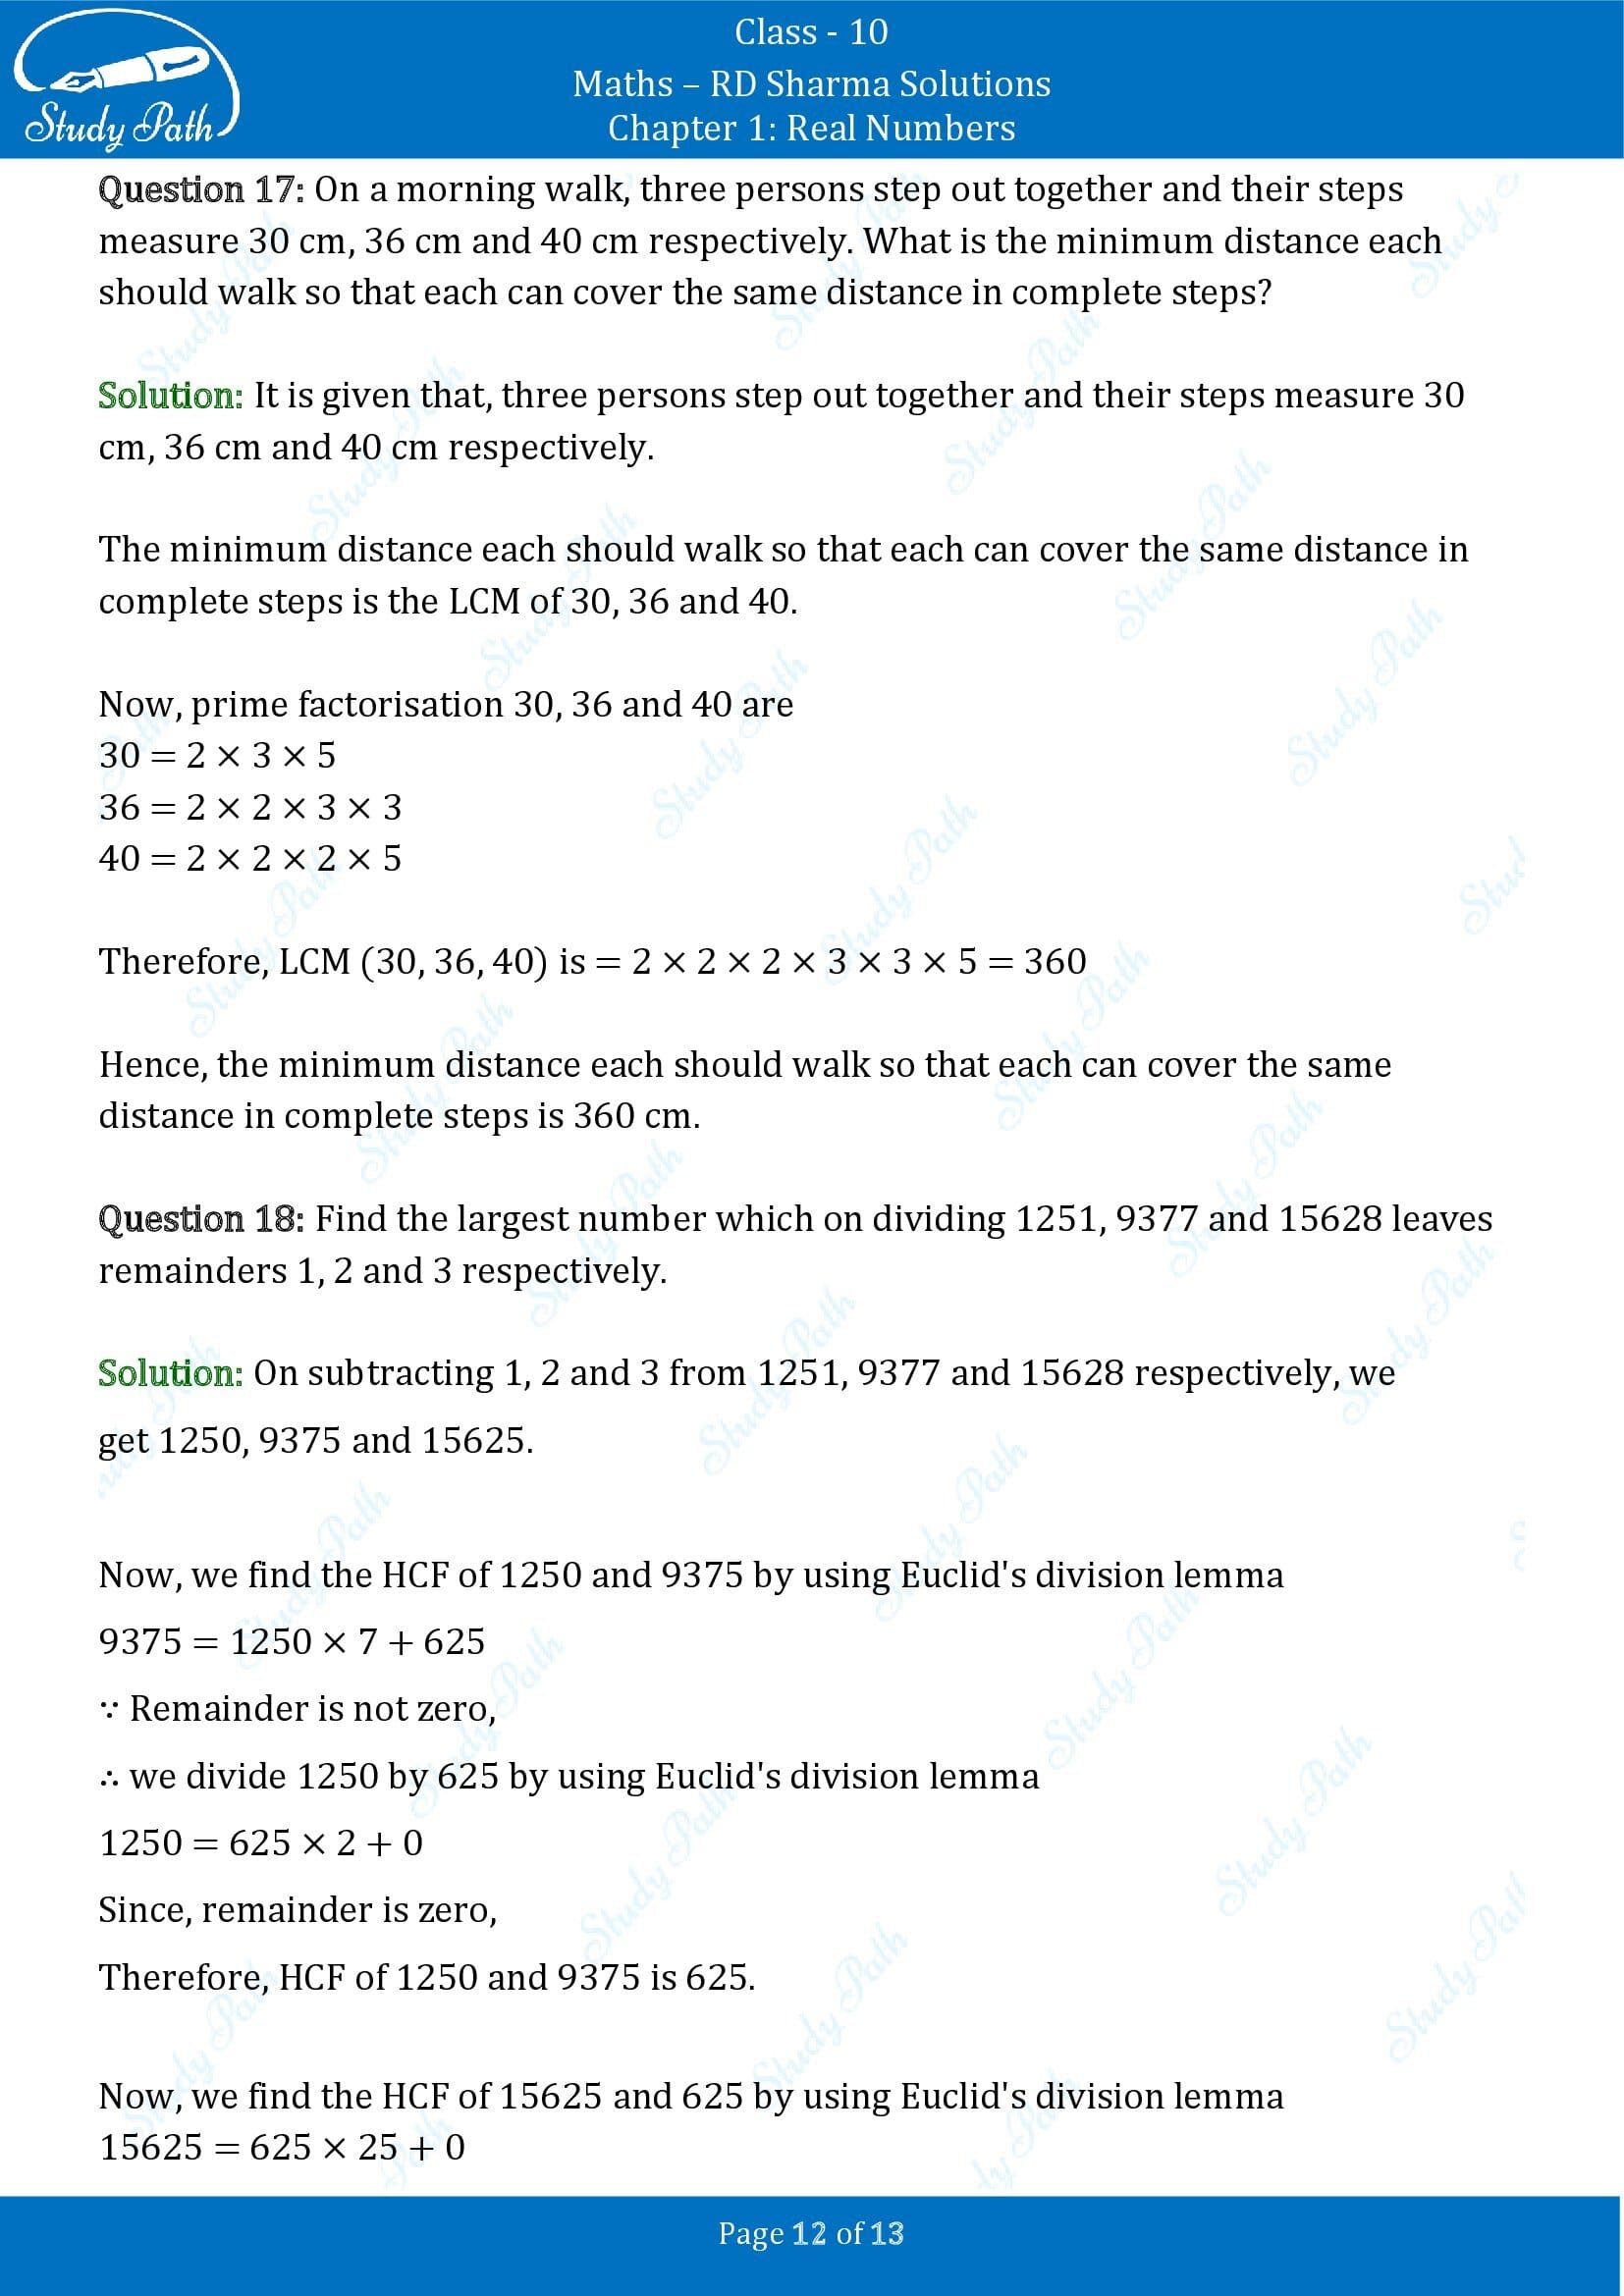 RD Sharma Solutions Class 10 Chapter 1 Real Numbers Exercise 1.4 00012